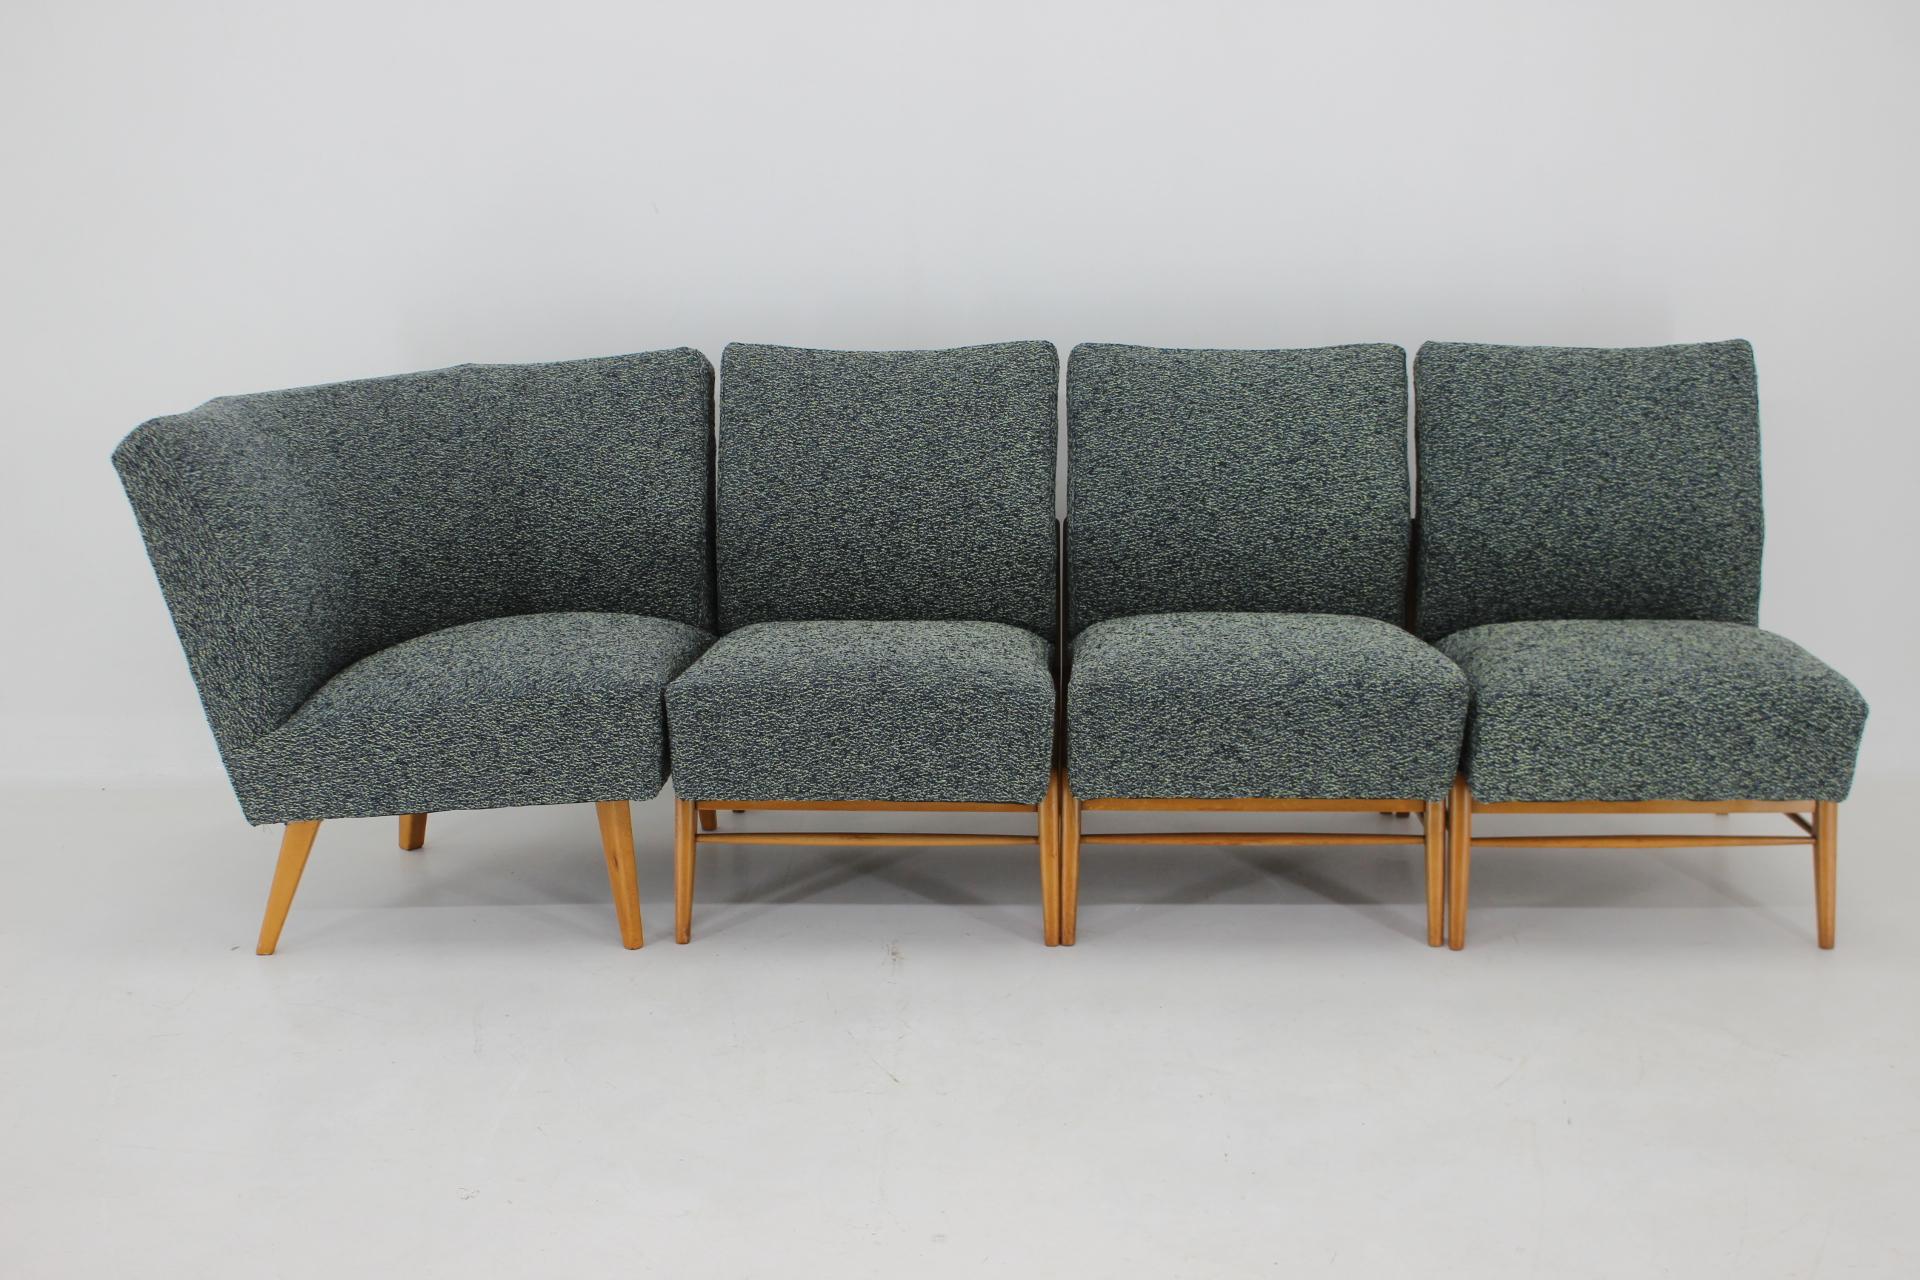 Late 20th Century 1970s Modular Sofa or Chairs in Beech wood and Kirgby Fabric, Czechoslovakia For Sale